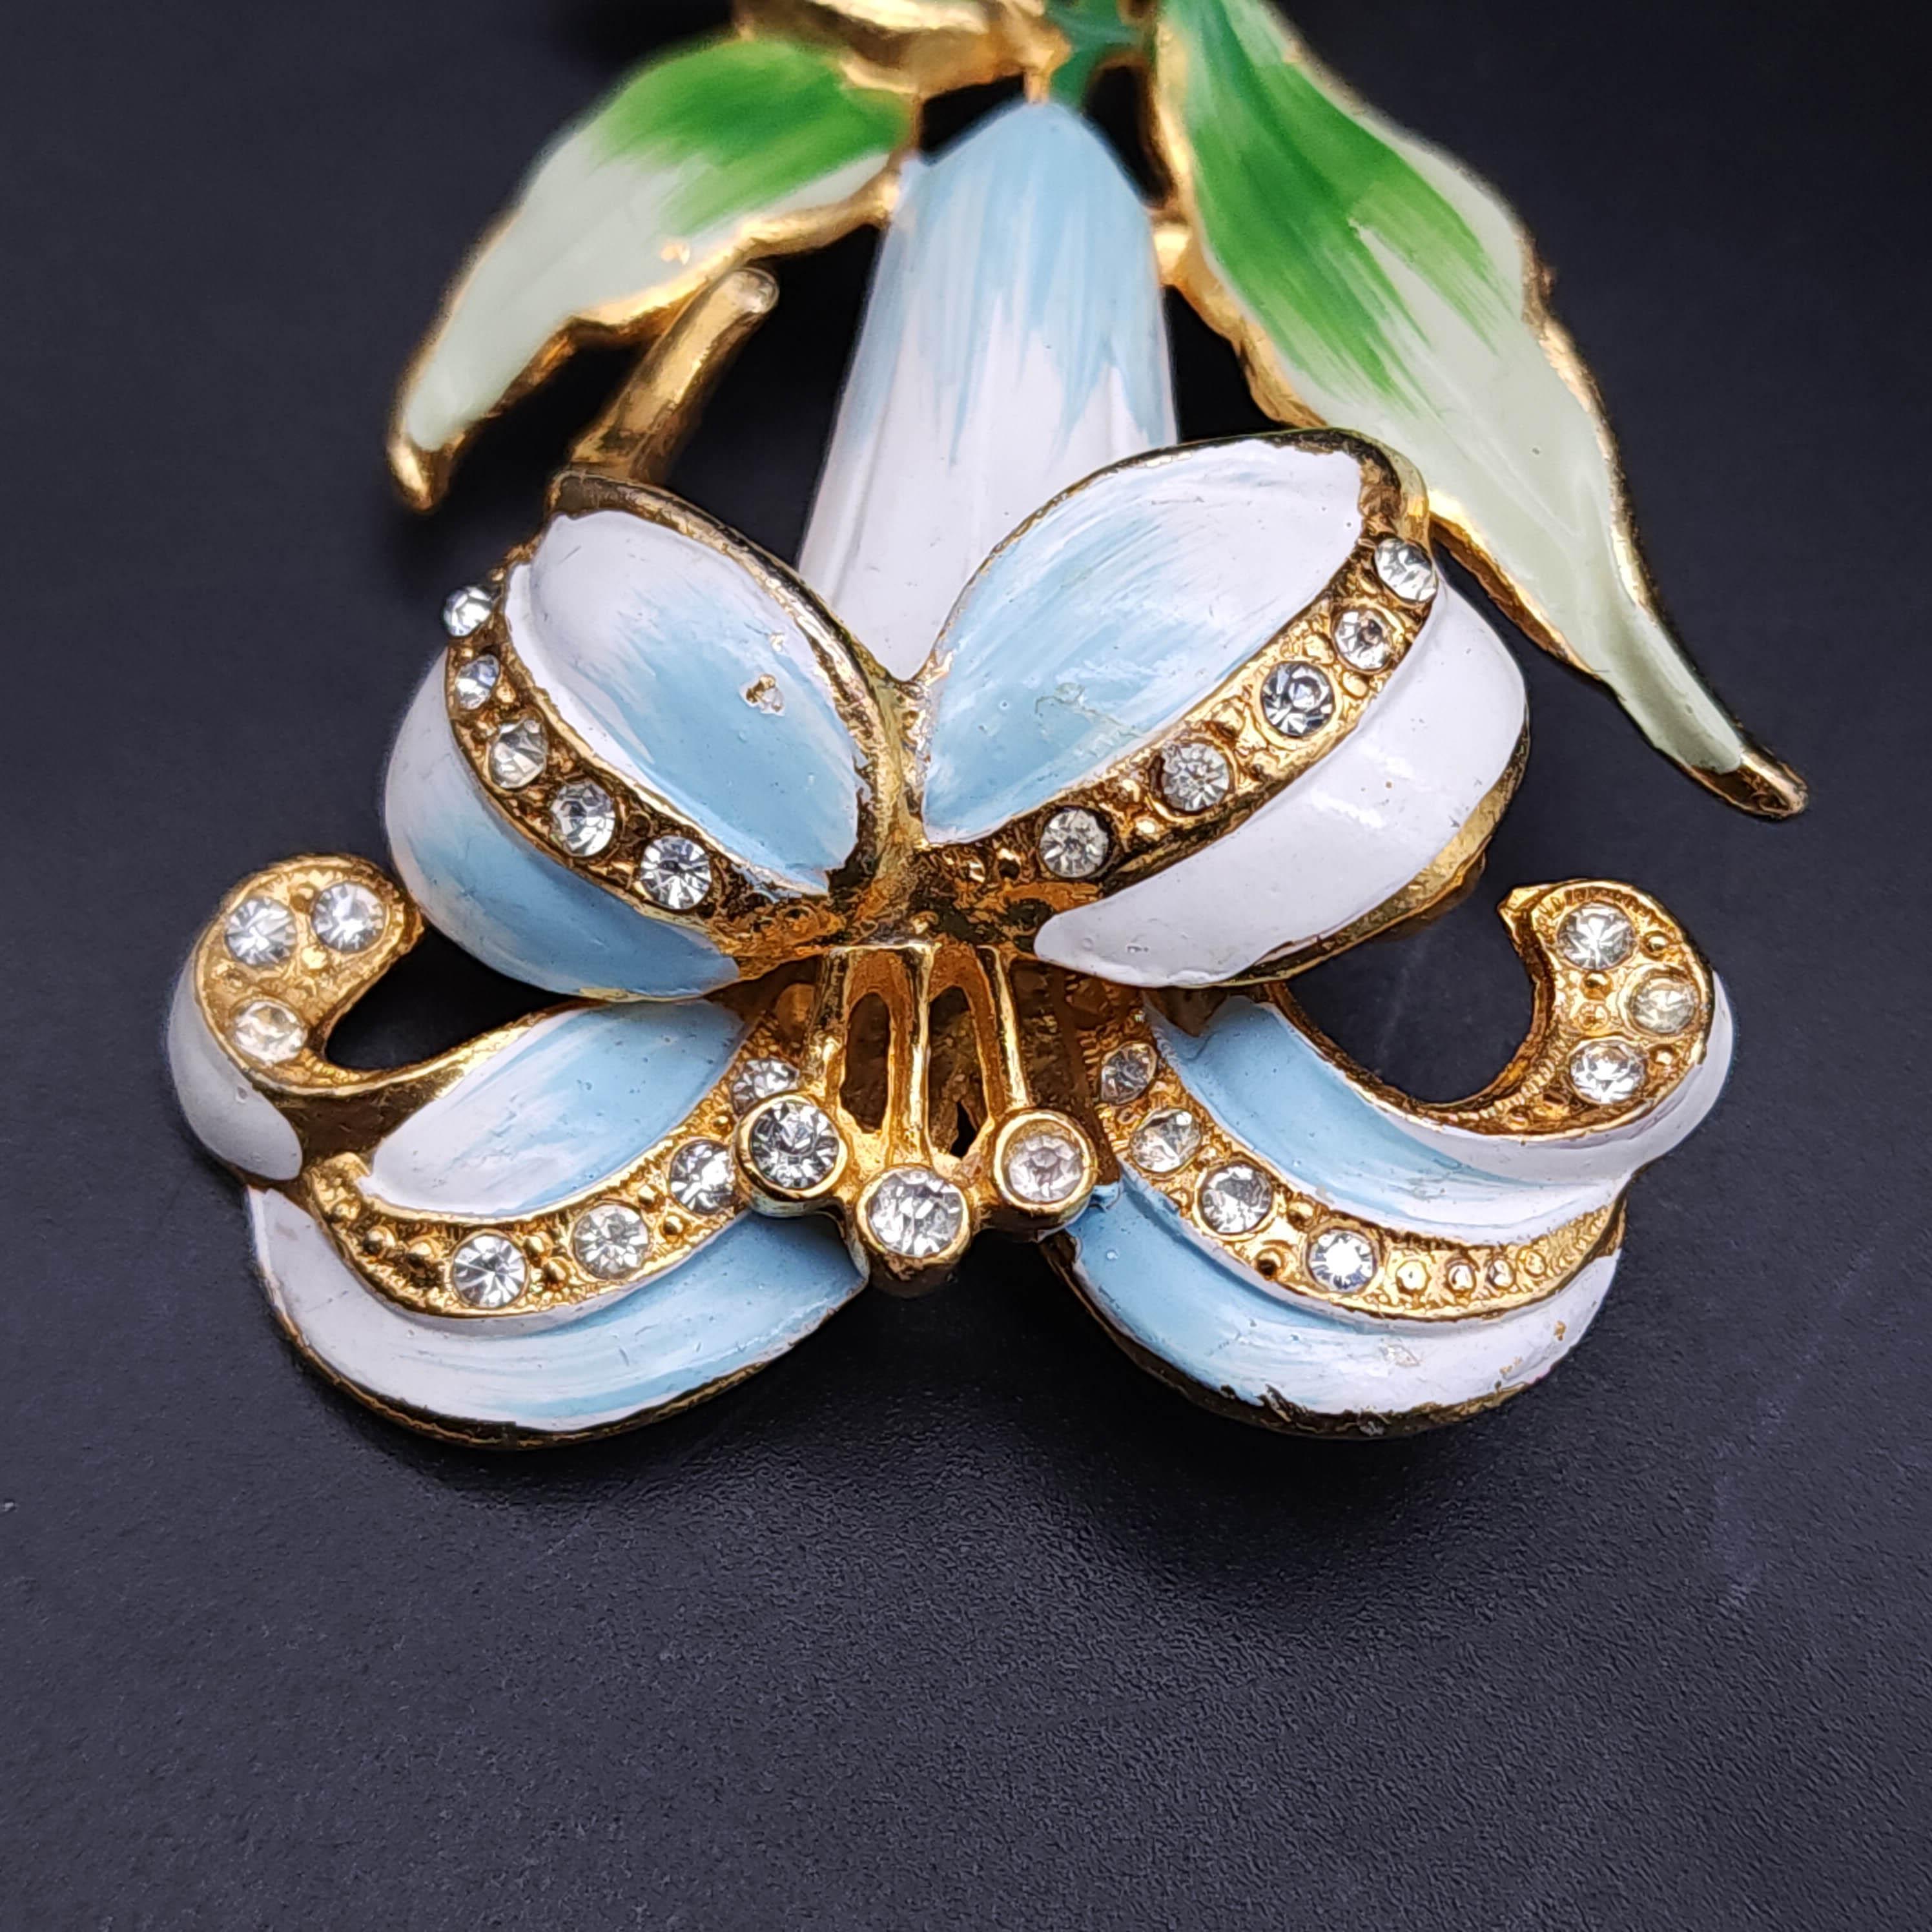 Retro Vintage Coro Flower Pin Brooch, Green White Blue Enamel and Crystals, Gold For Sale